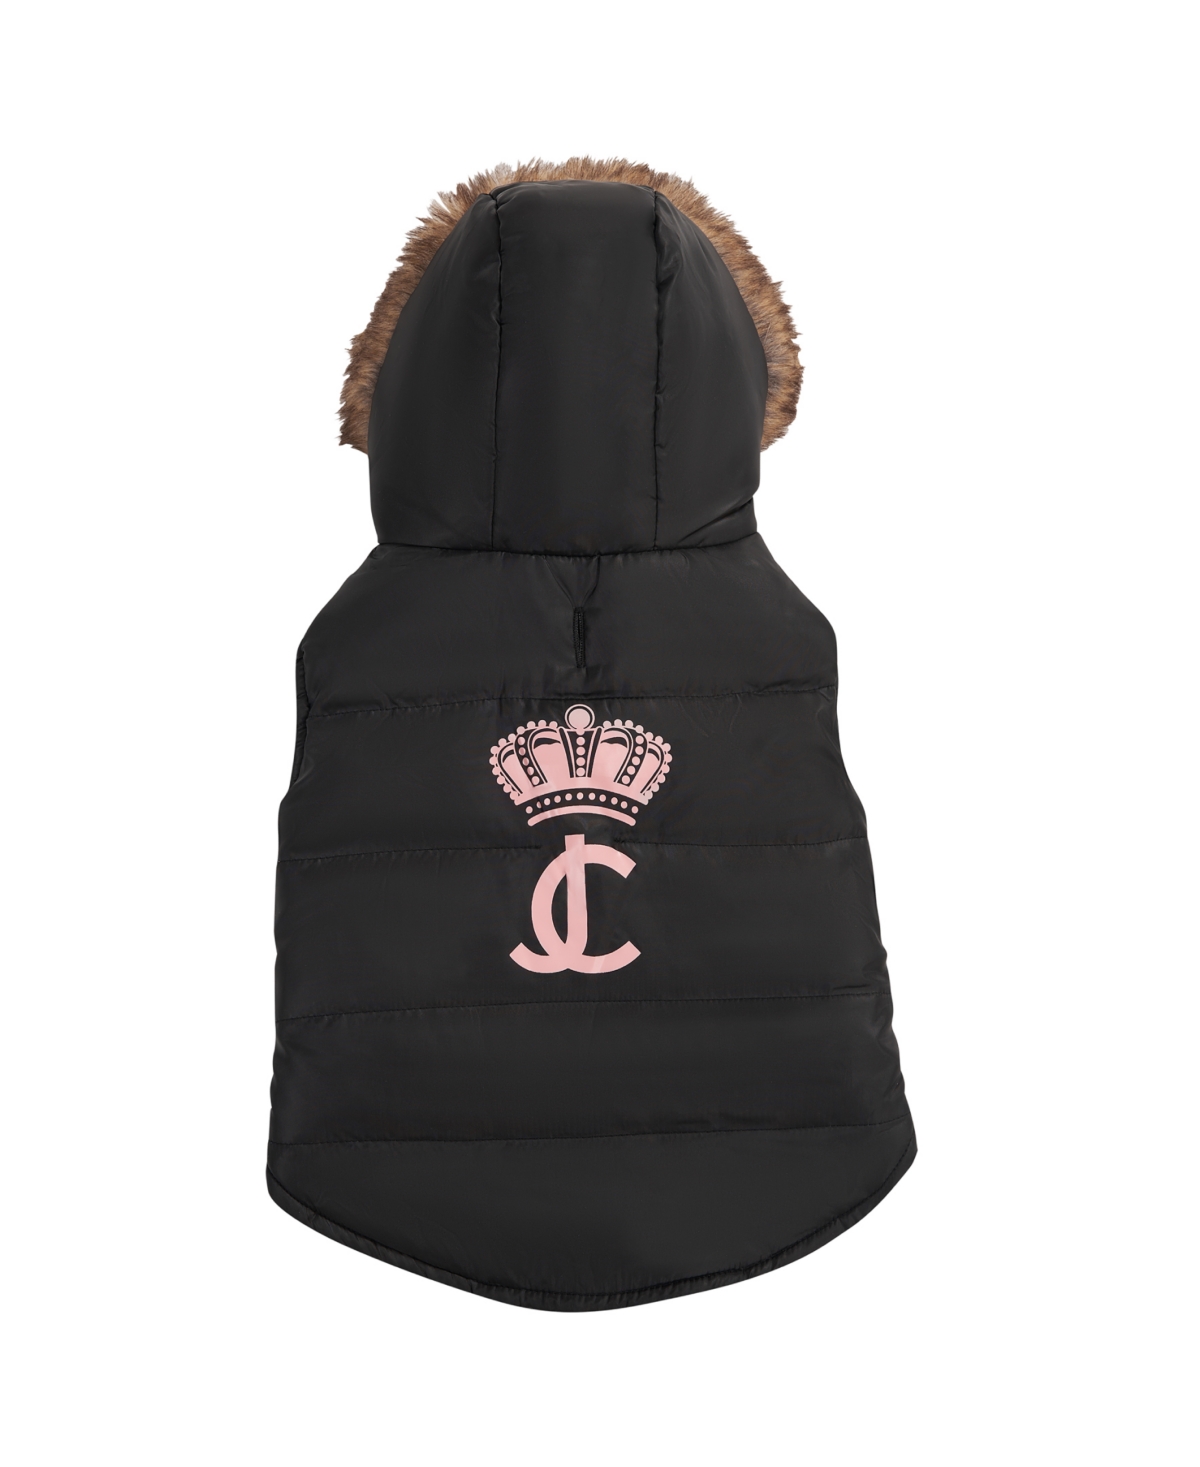 Faux Fur Hooded Pet Jacket for Dogs and Cats, Extra Small/Small - M/L (- lbs.)